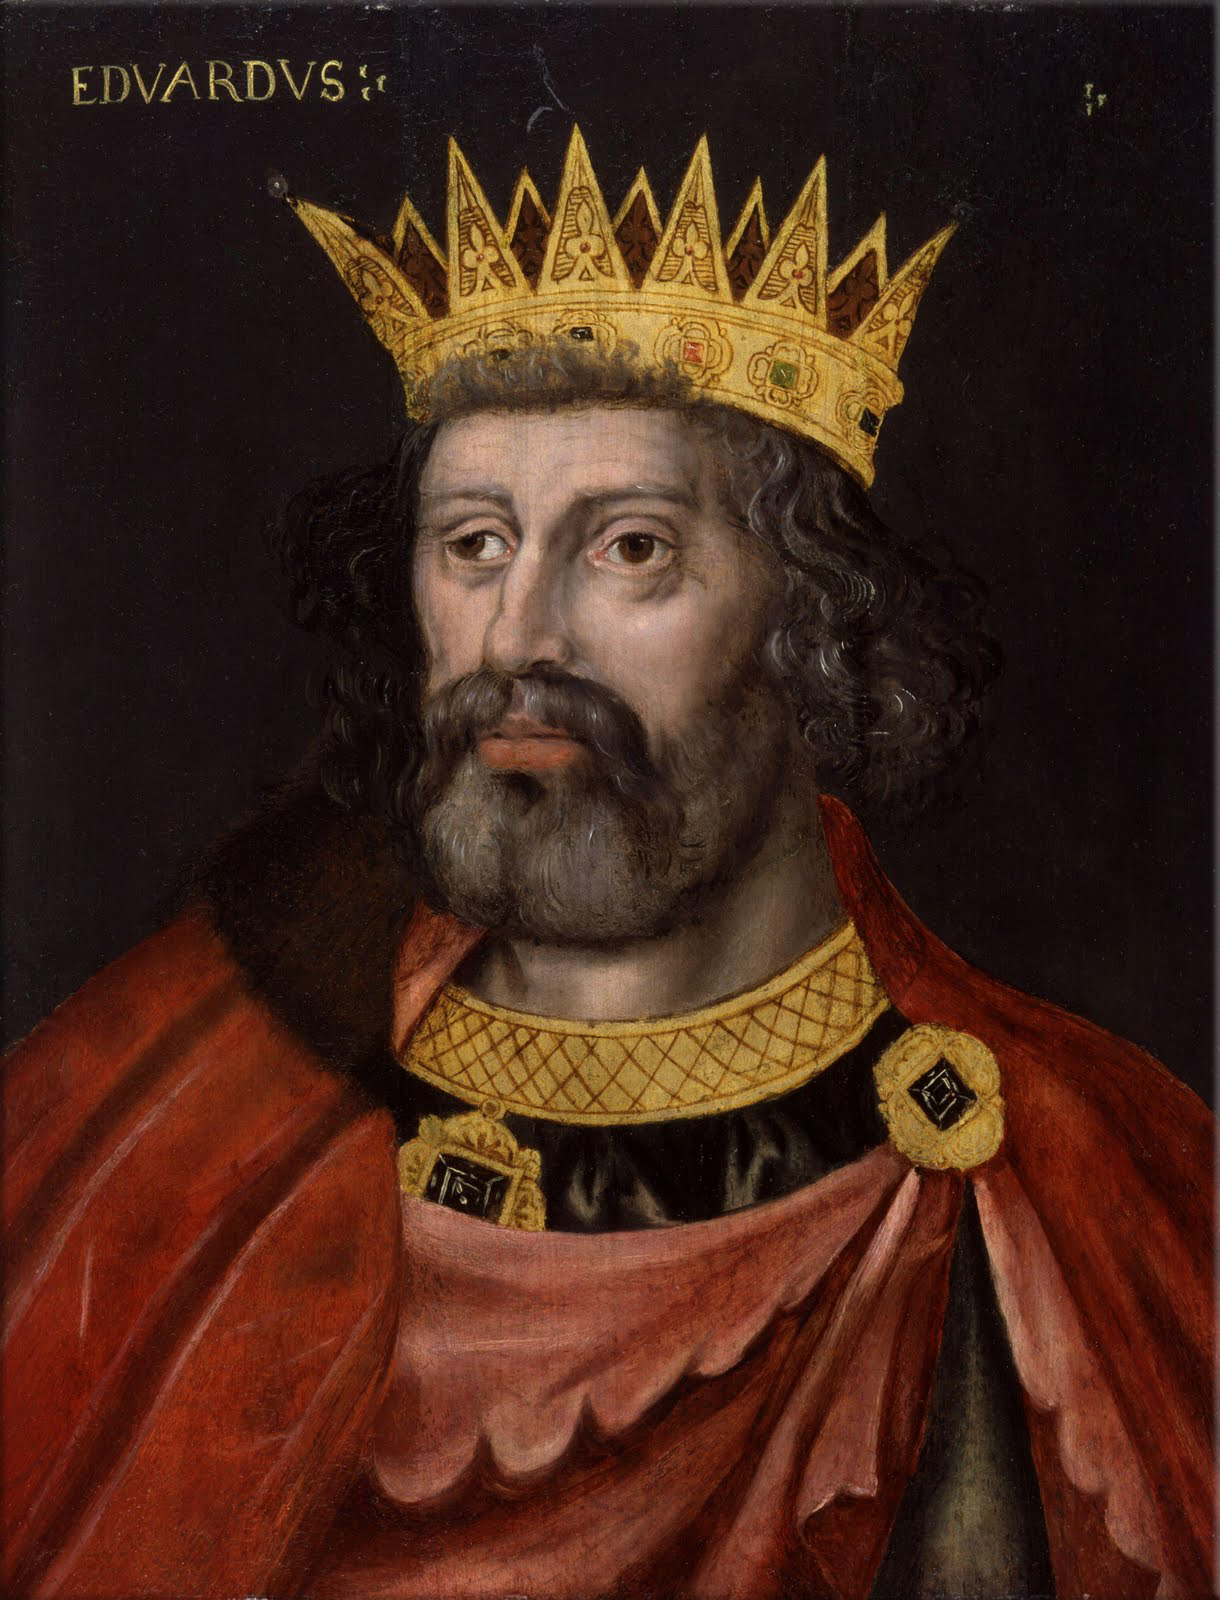 Edward I (June 17, 1239 – July 7, 1307), also known as Edward Longshanks and the Hammer of the Scots (from Latin: Malleus Scotorum), was King of England from 1272 to 1307